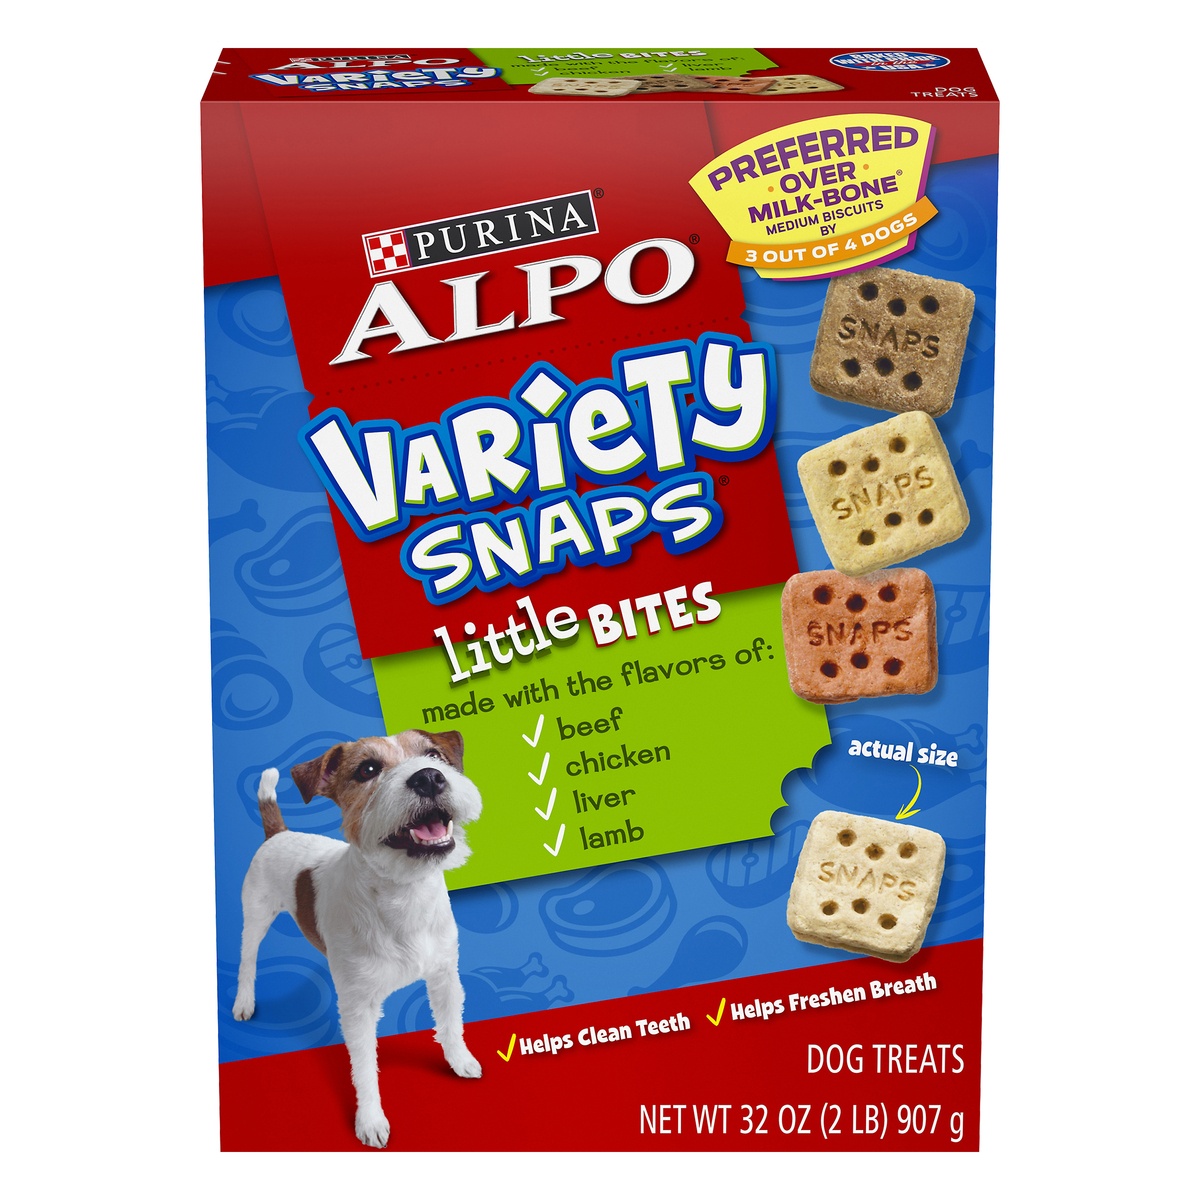 slide 11 of 11, Purina ALPO Variety Snaps Little Bites Dog Treats with Beef, Chicken, Liver & Lamb Flavors, 32 oz